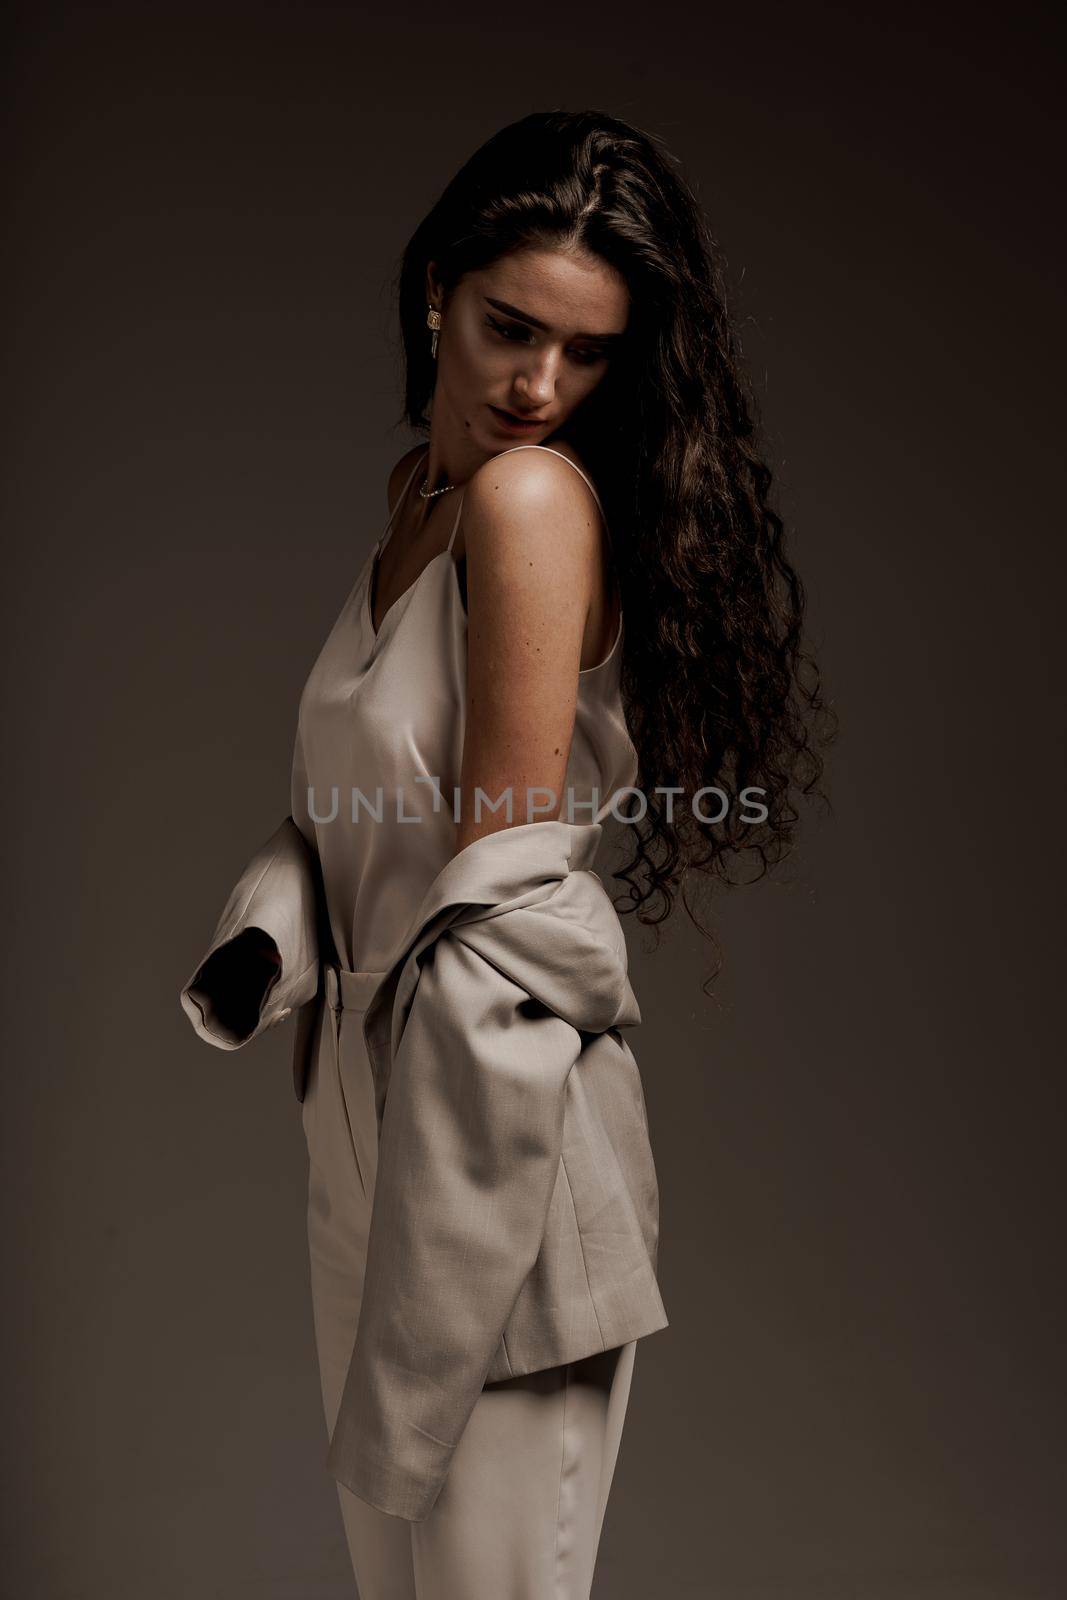 Fashion, elegant and sexy professional model in studio. Gorgeous young female in classic suit in photostudio. Attractive girl with curly hair posing.